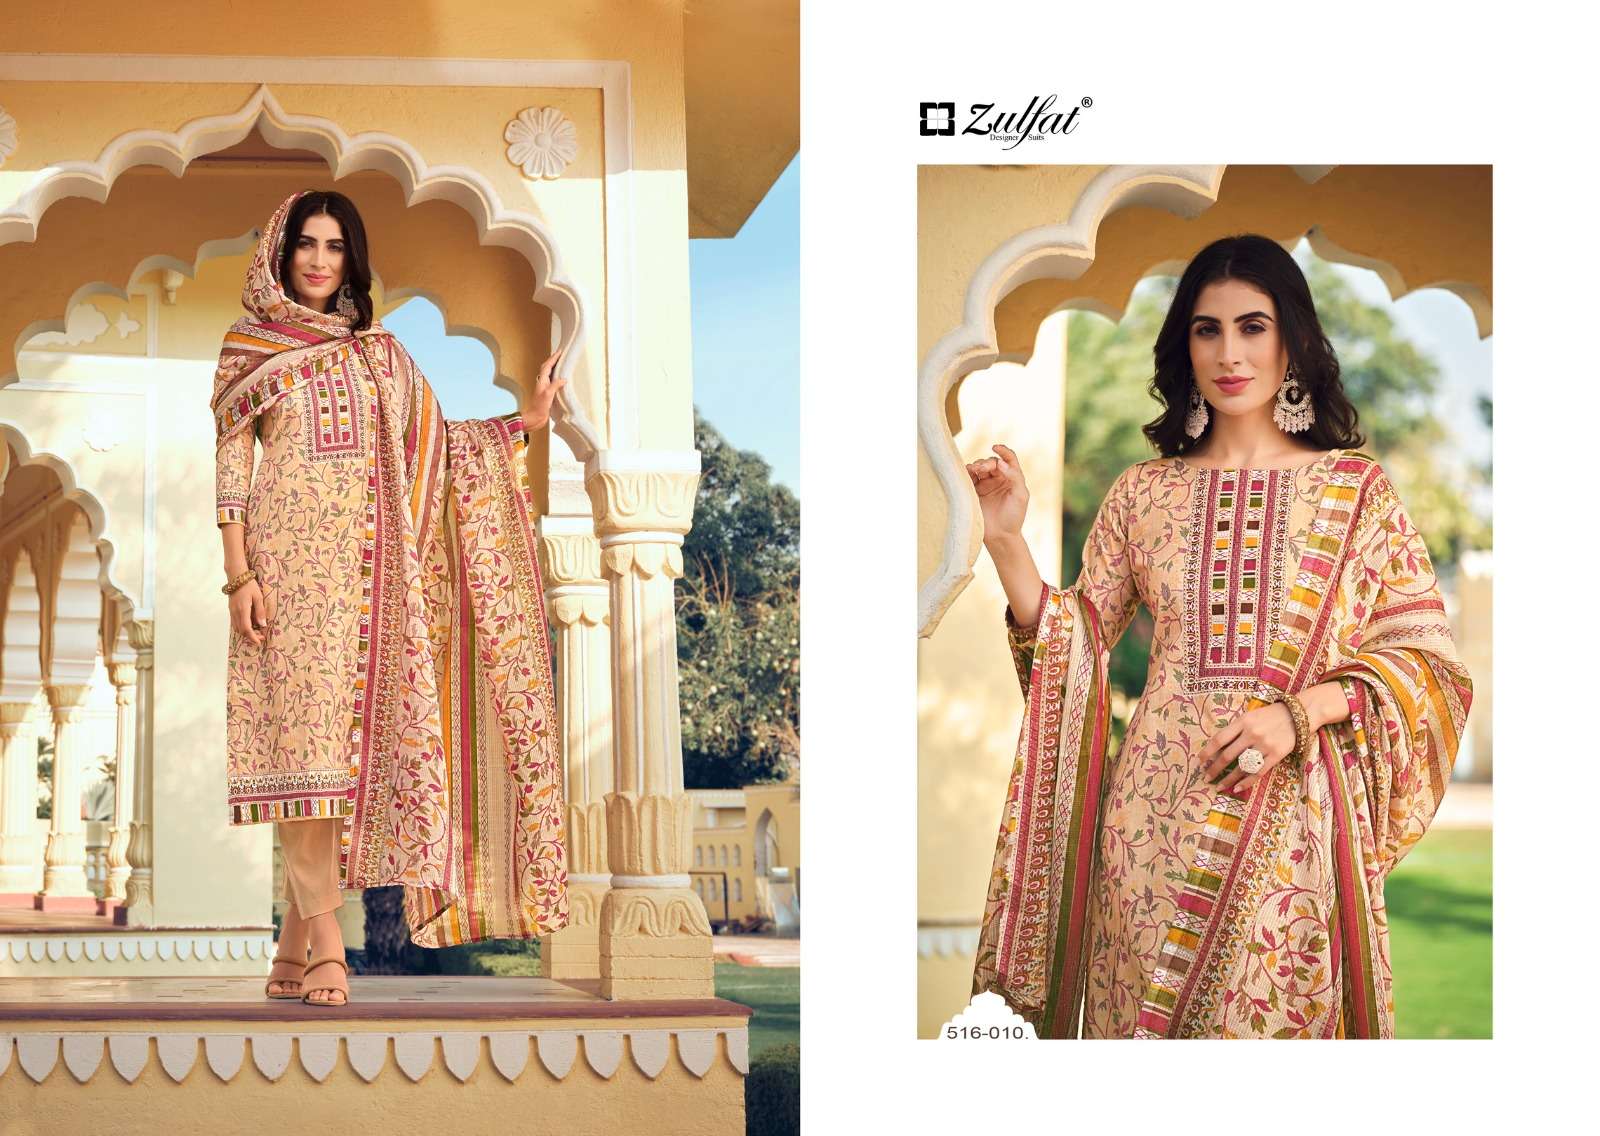 Zulfat Meera Ready Made Exclusive Cotton Dress wholesale online